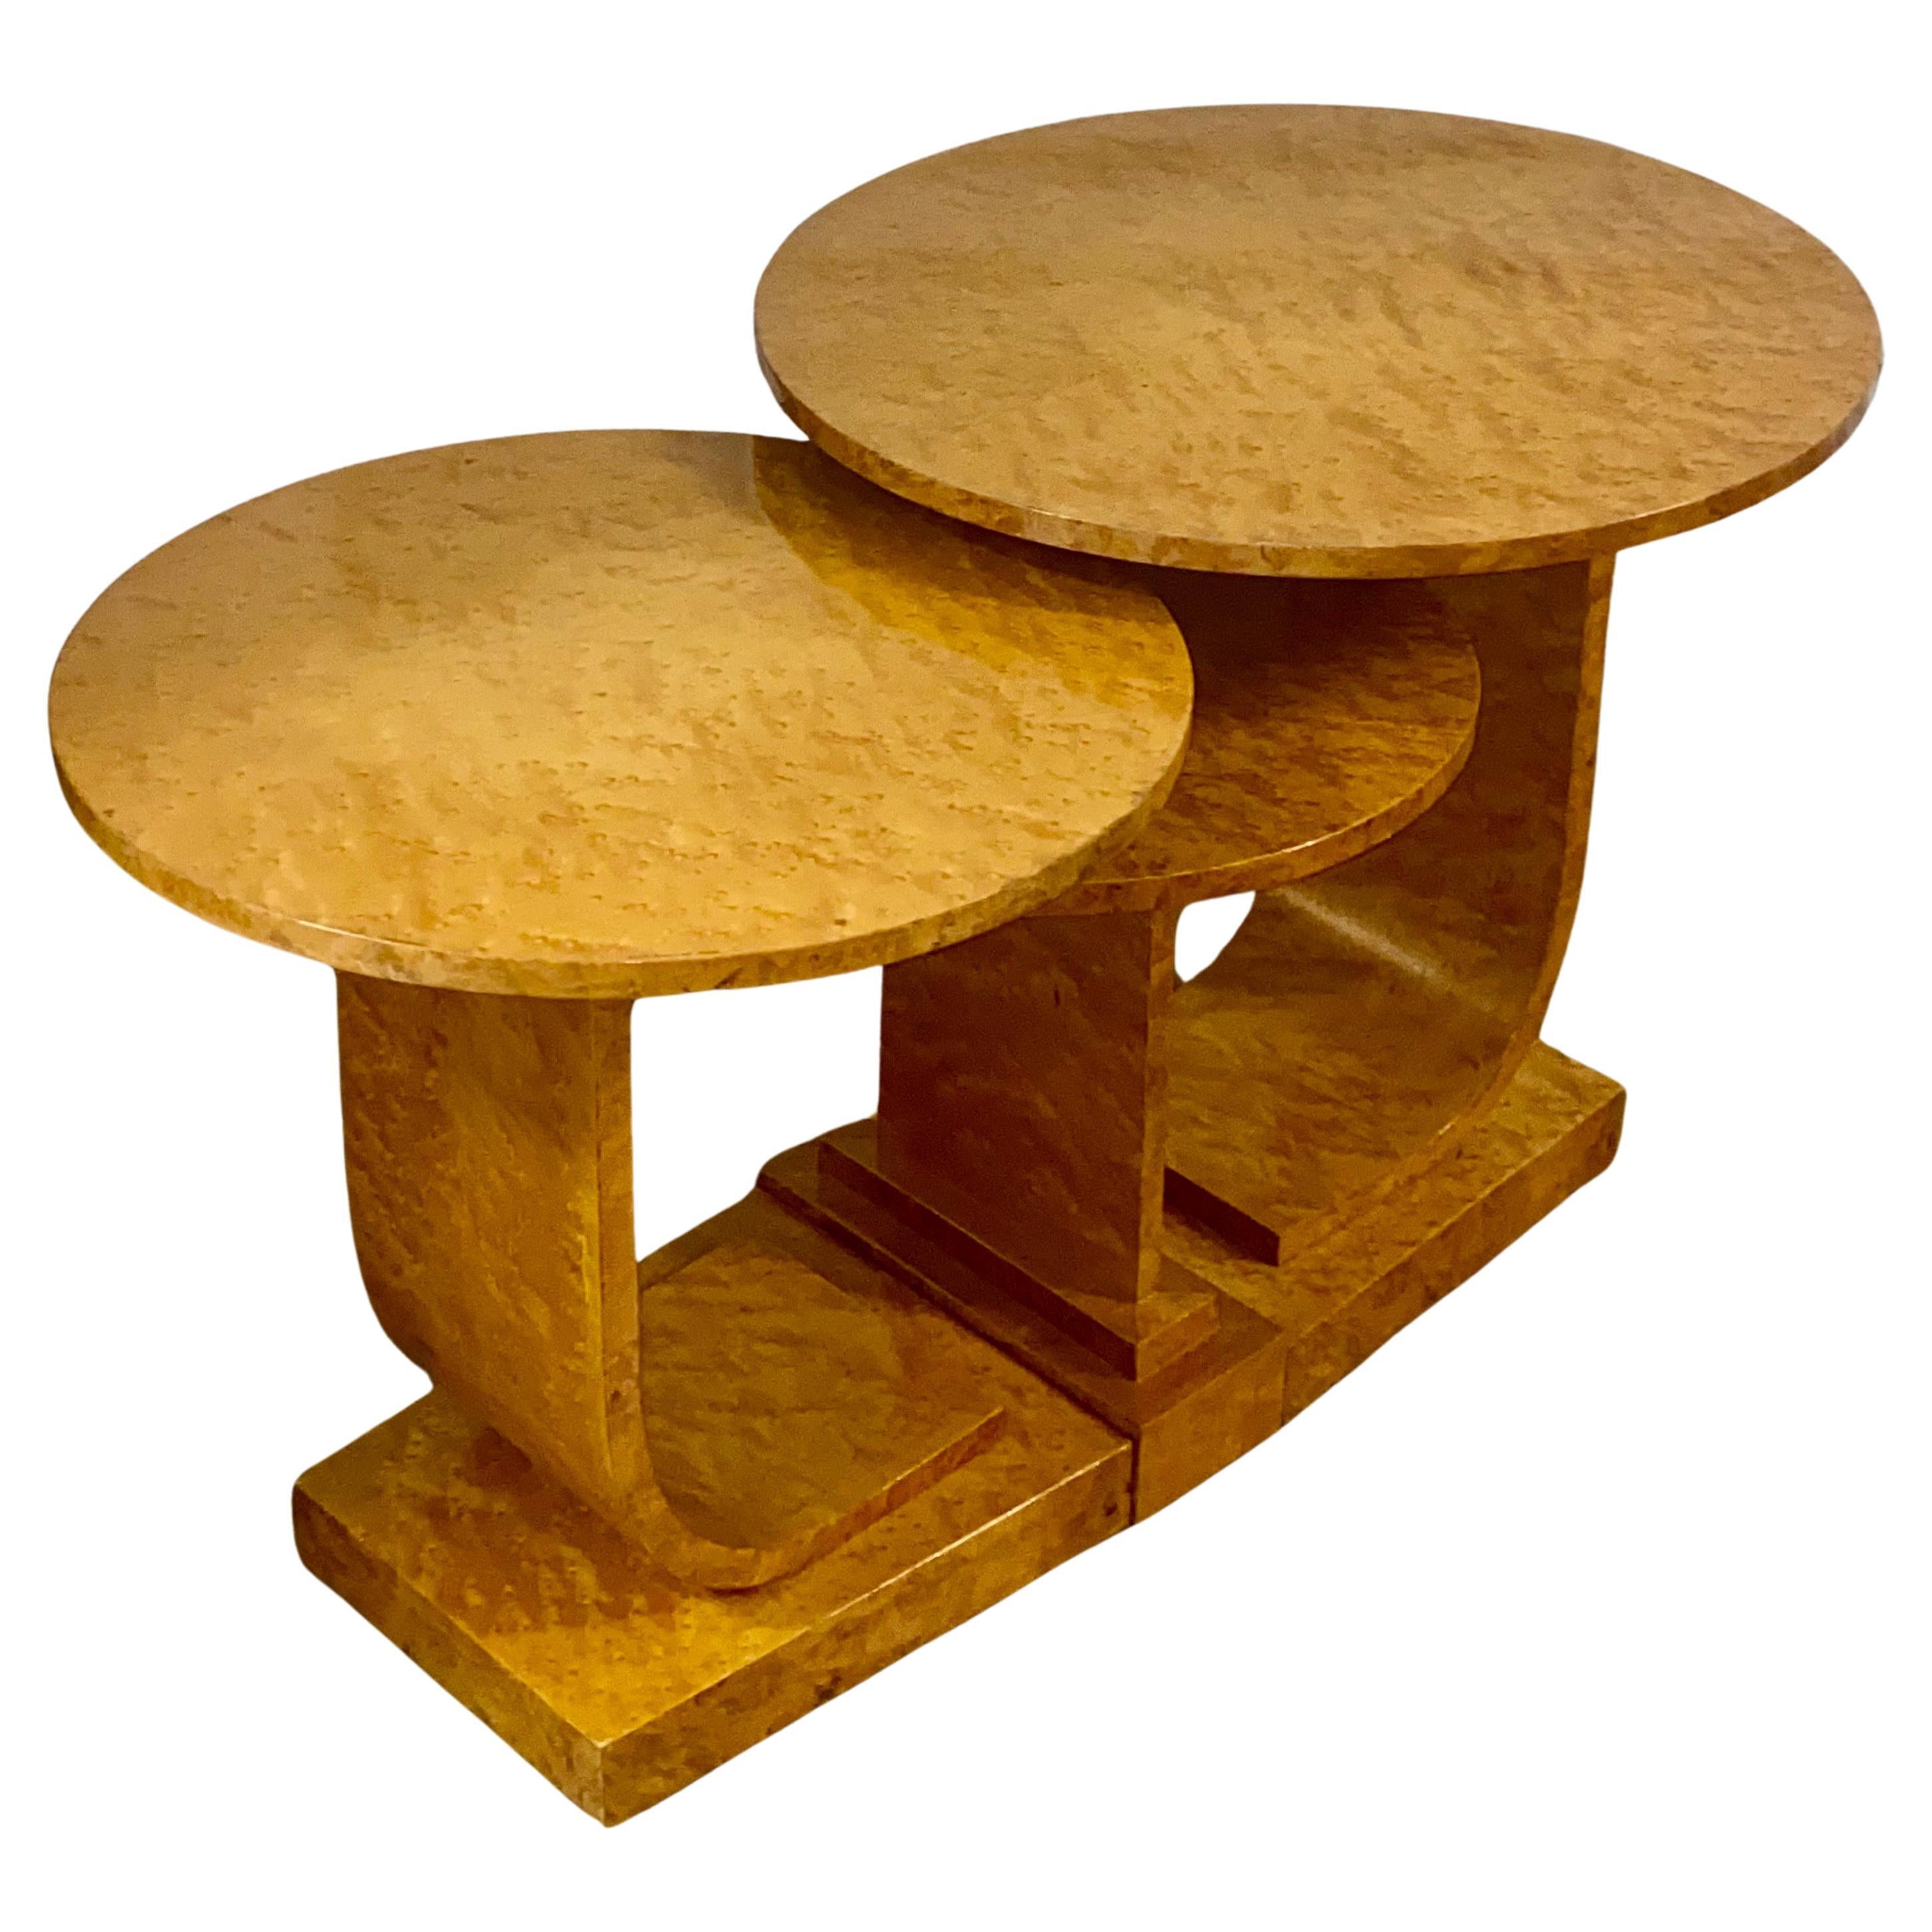 A Rare Art Deco Blonde Birds Eye Maple J Nest of Tables by Epstein Circa 1930 For Sale 7